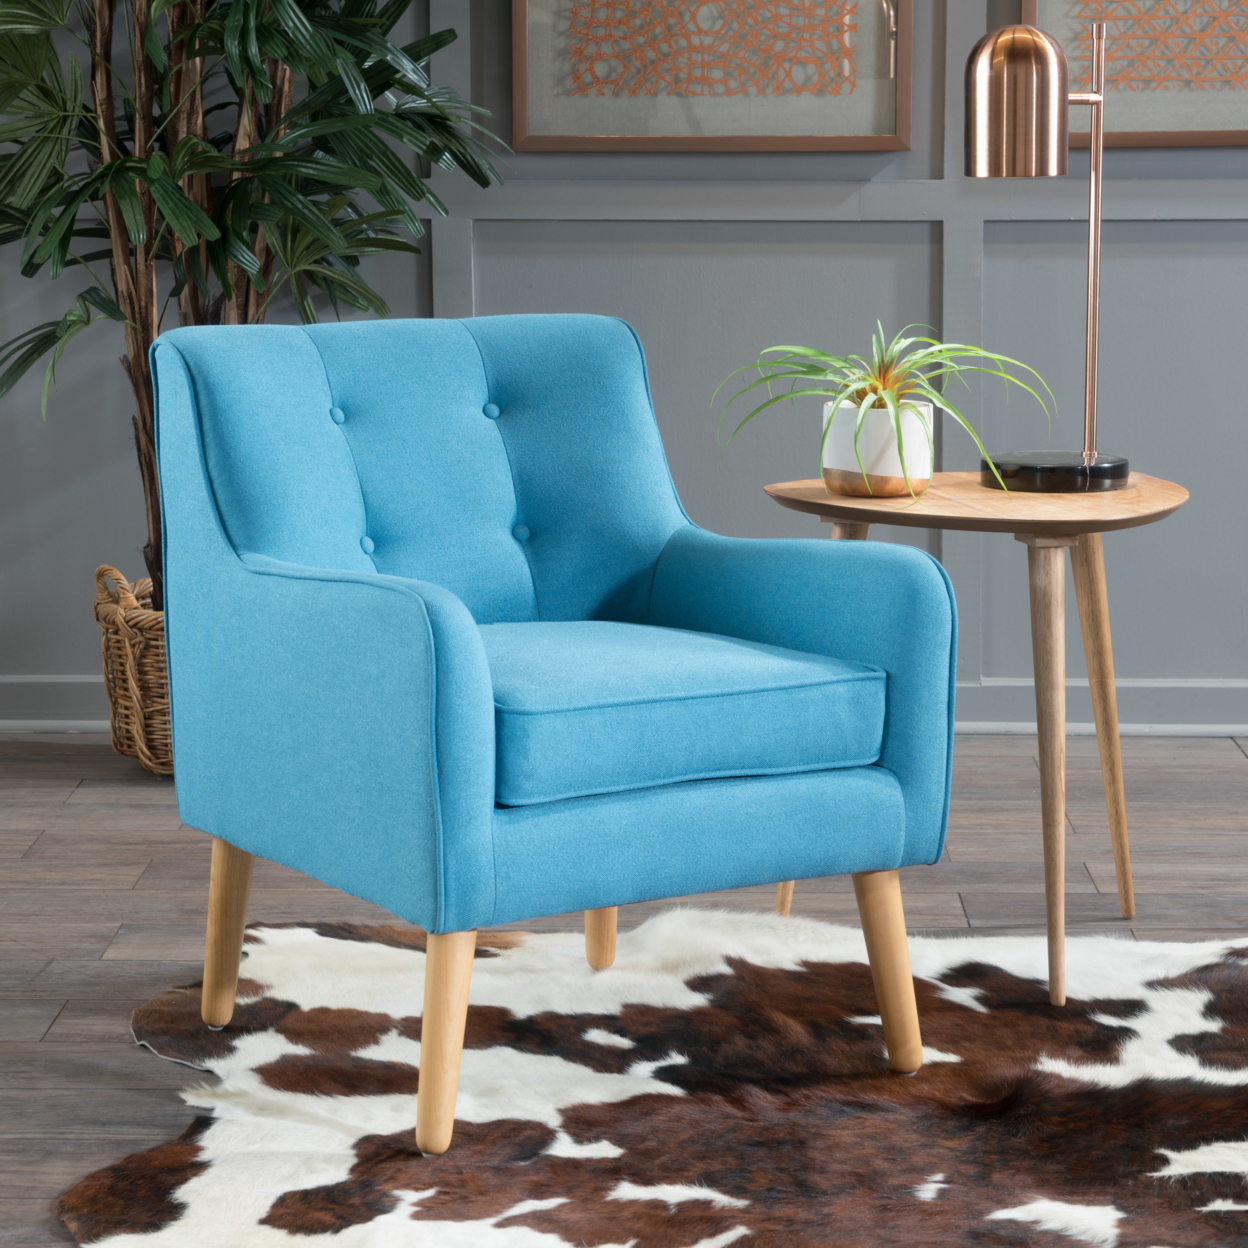 Fontinella Mid Century Tufted Back Fabric Arm Chair - Teal, Set Of 1